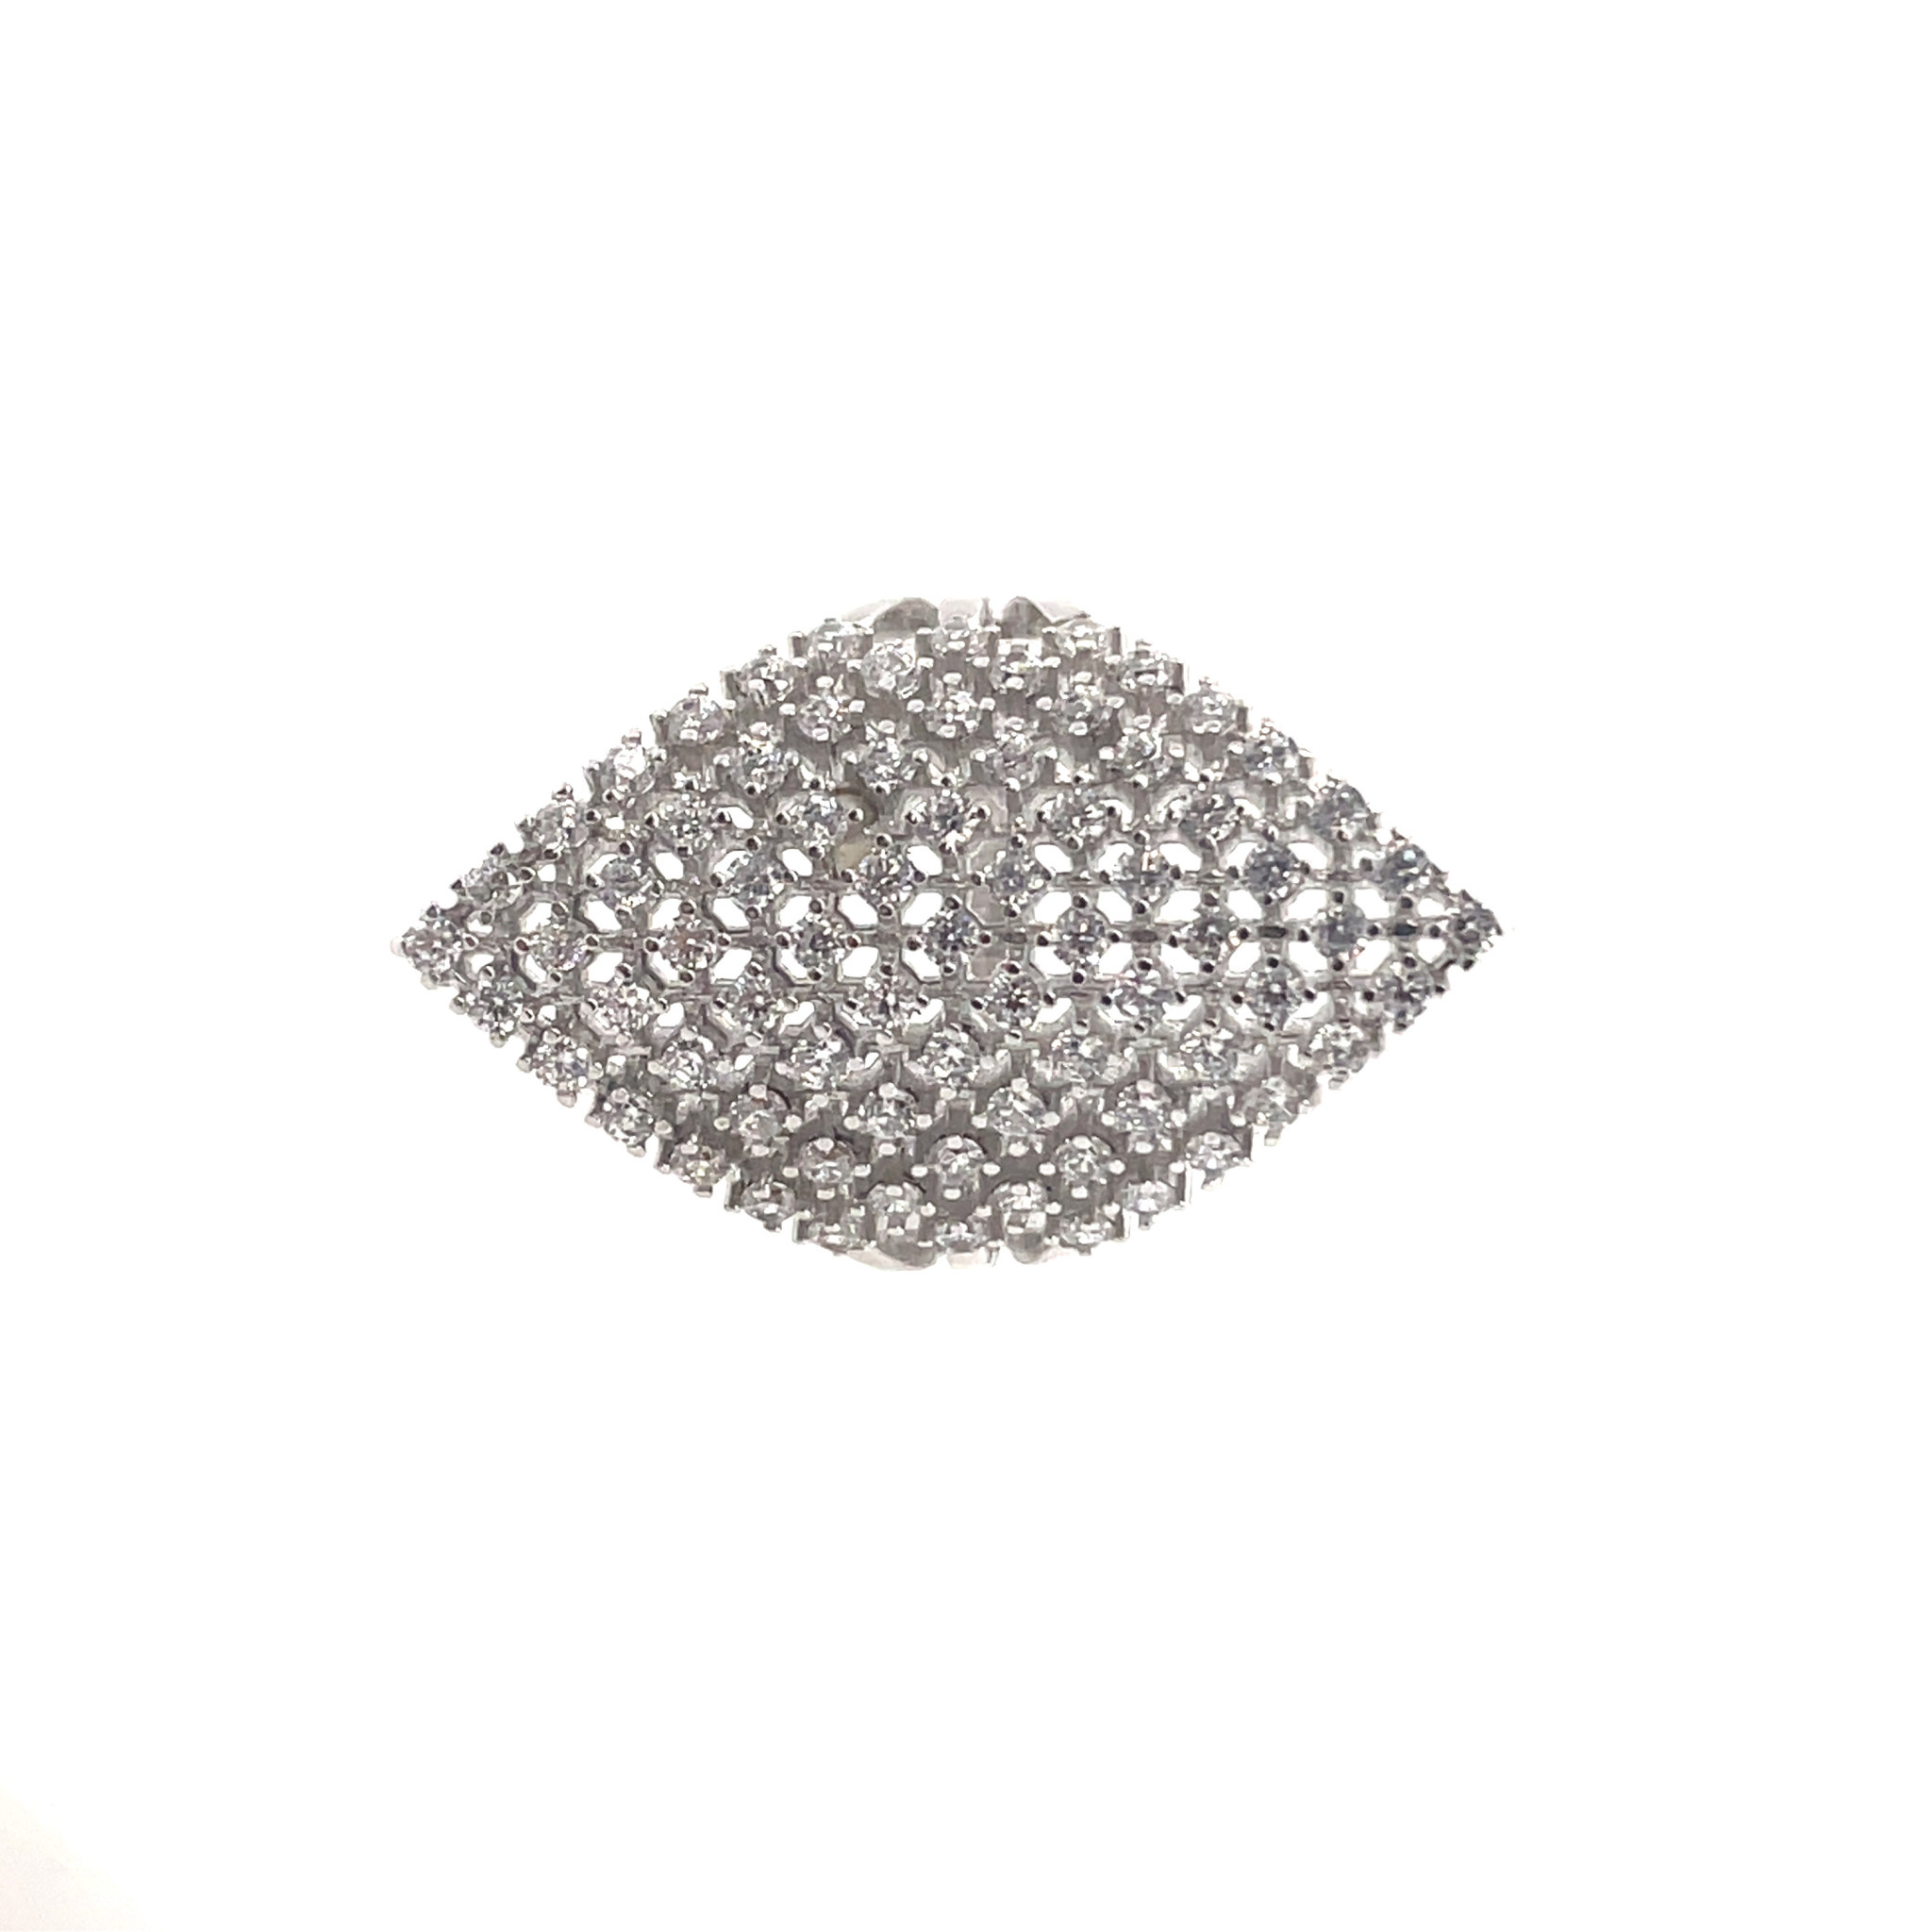 80032 STERLING SILVER CUBIC ZIRCONIA MESH DESIGN DIAMOND SHAPE COCKTAIL RING